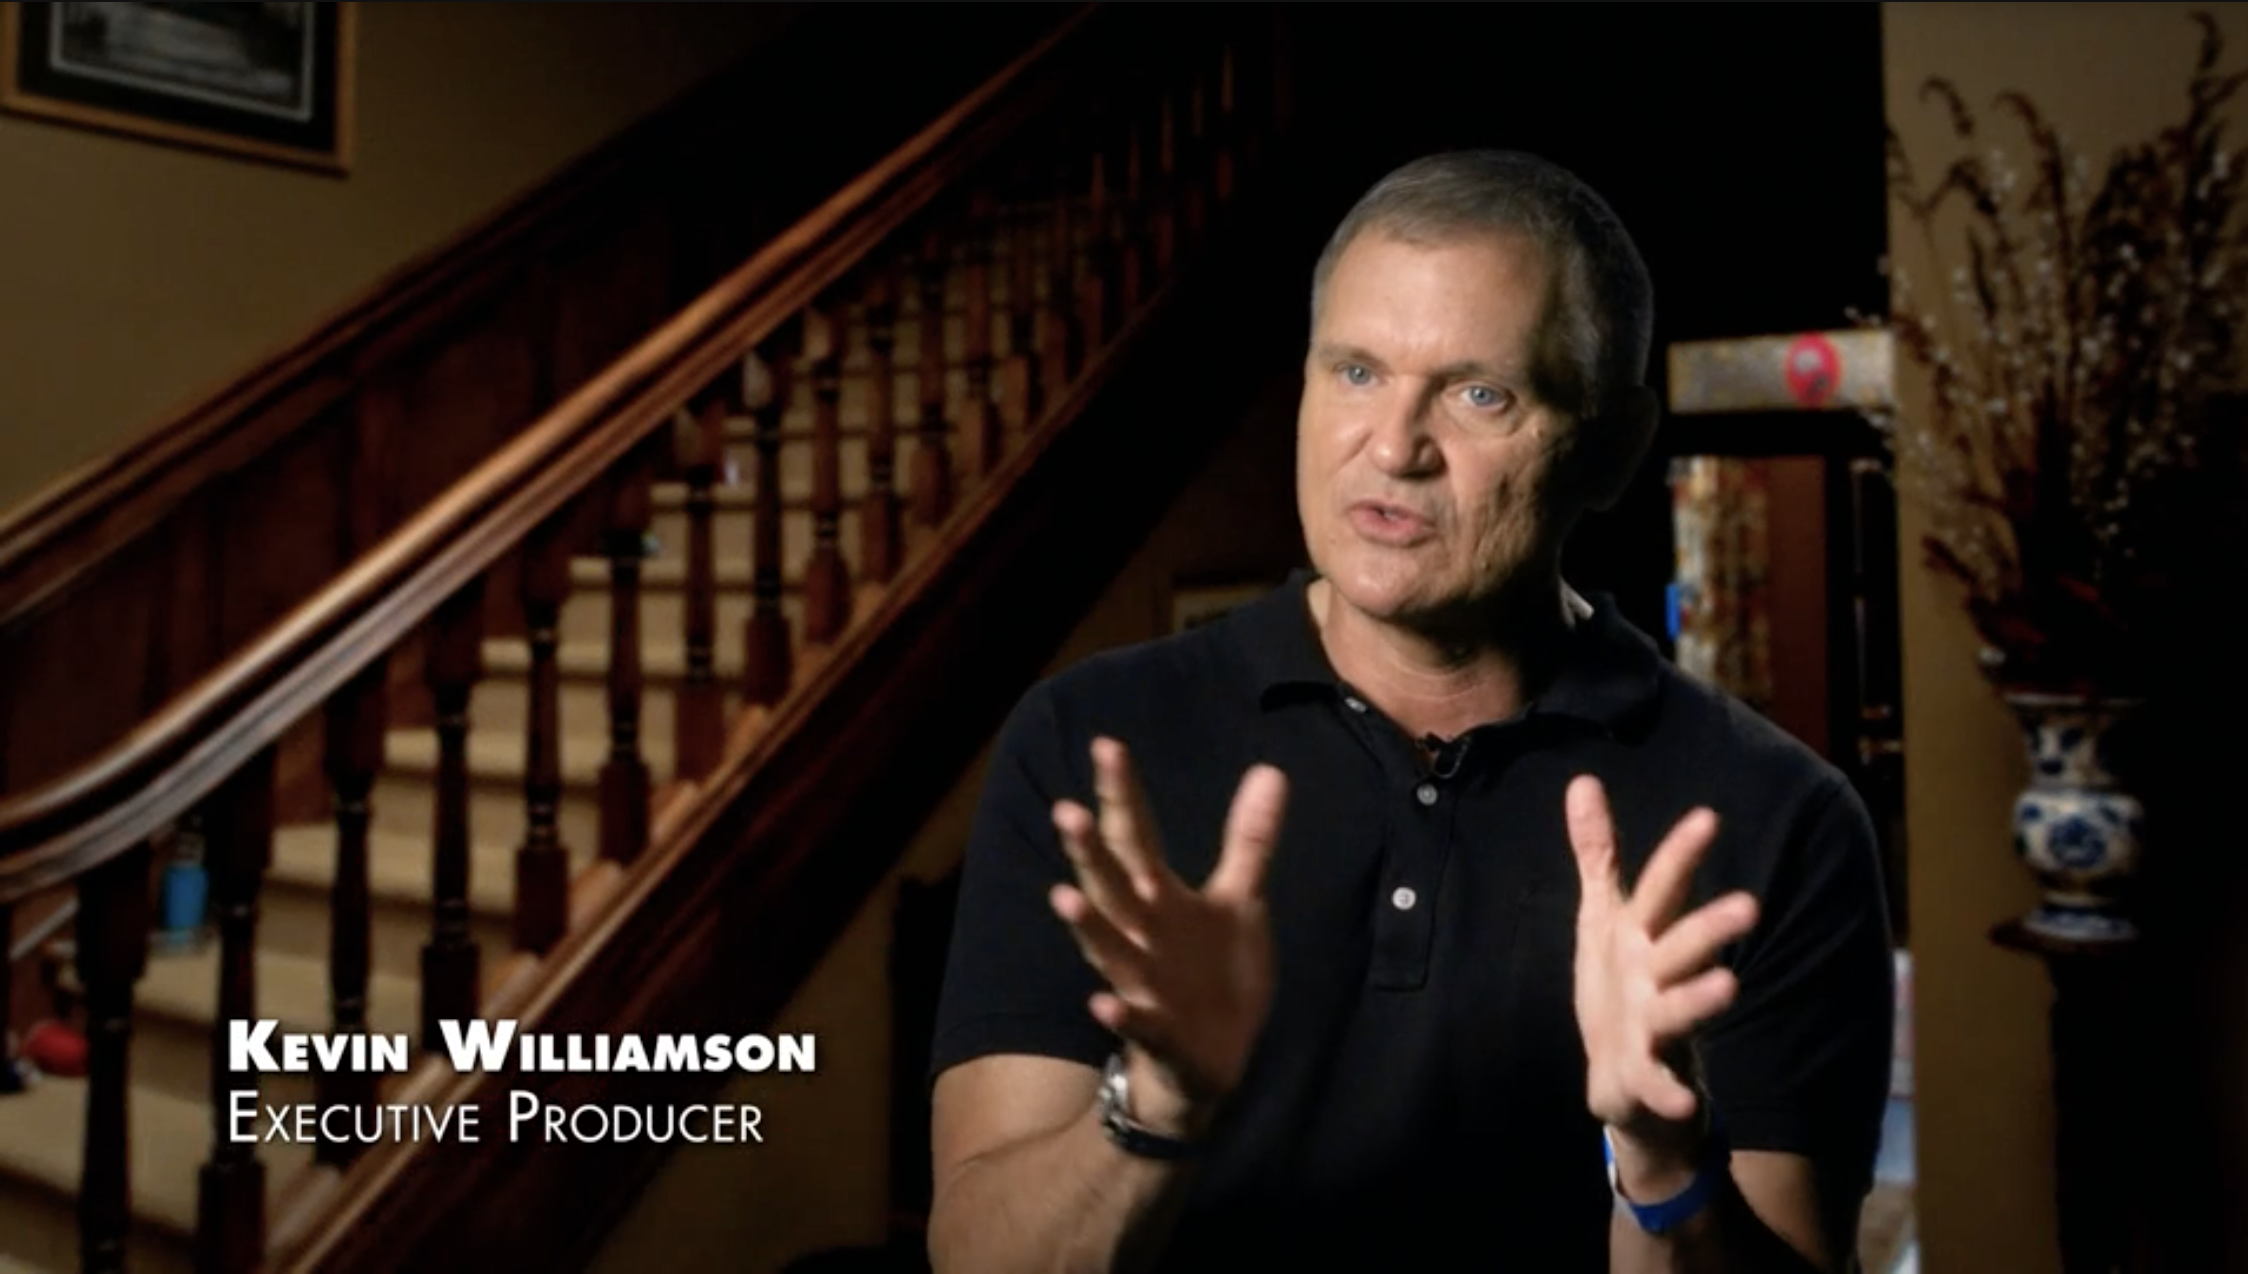 Kevin Williamson talking about the film